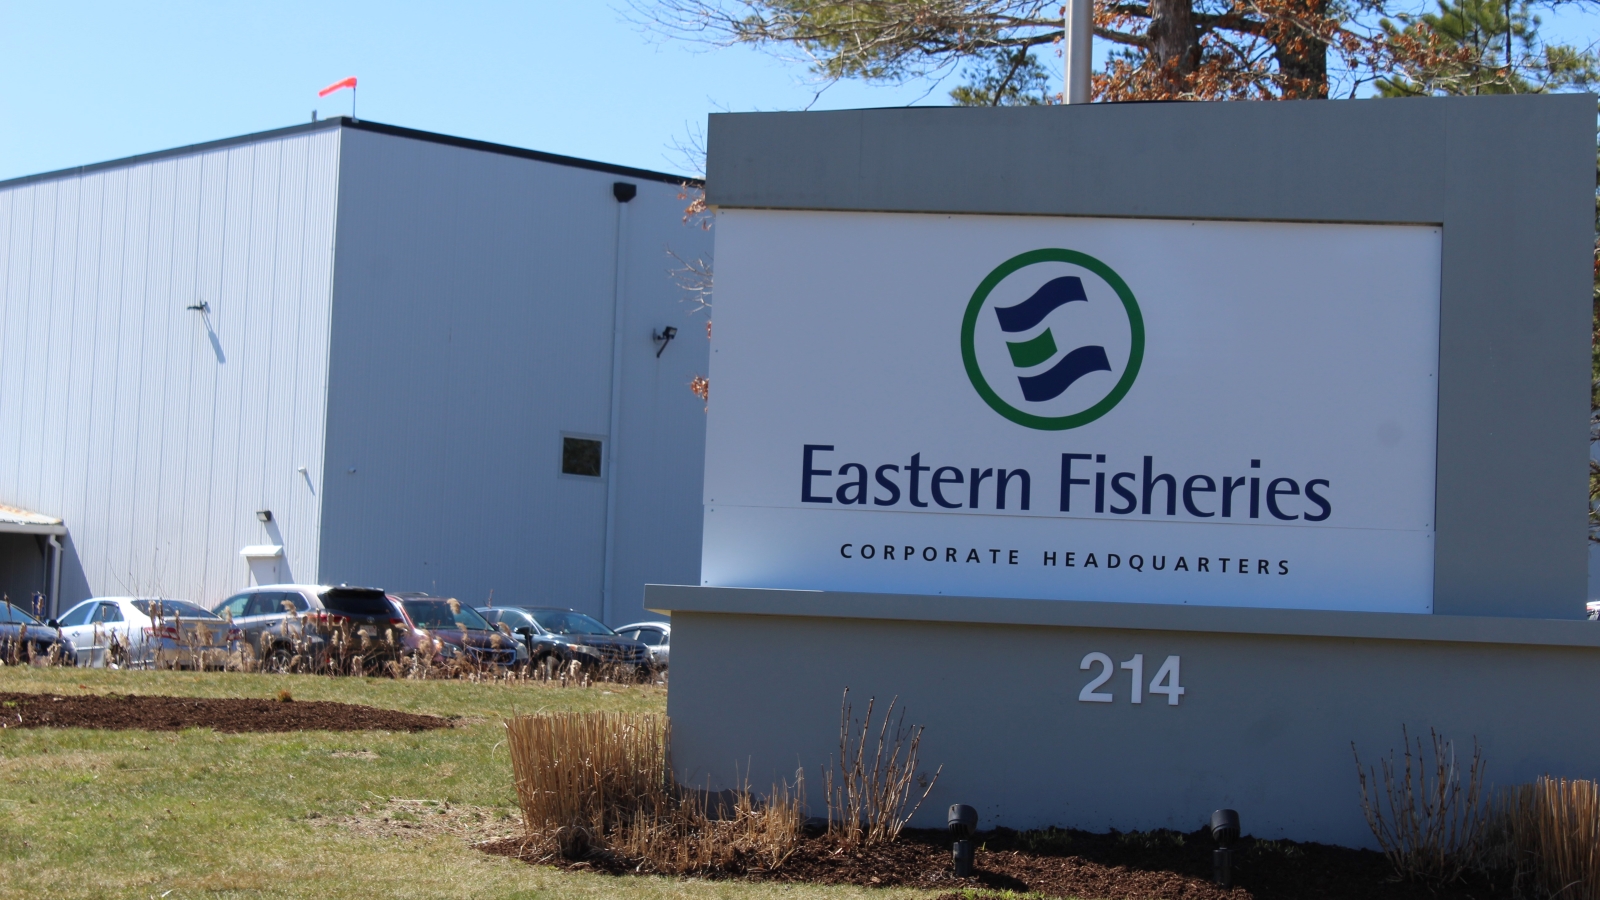 Eastern Fisheries operates two seafood processing plants in New Bedford and several more in Europe and Asia.